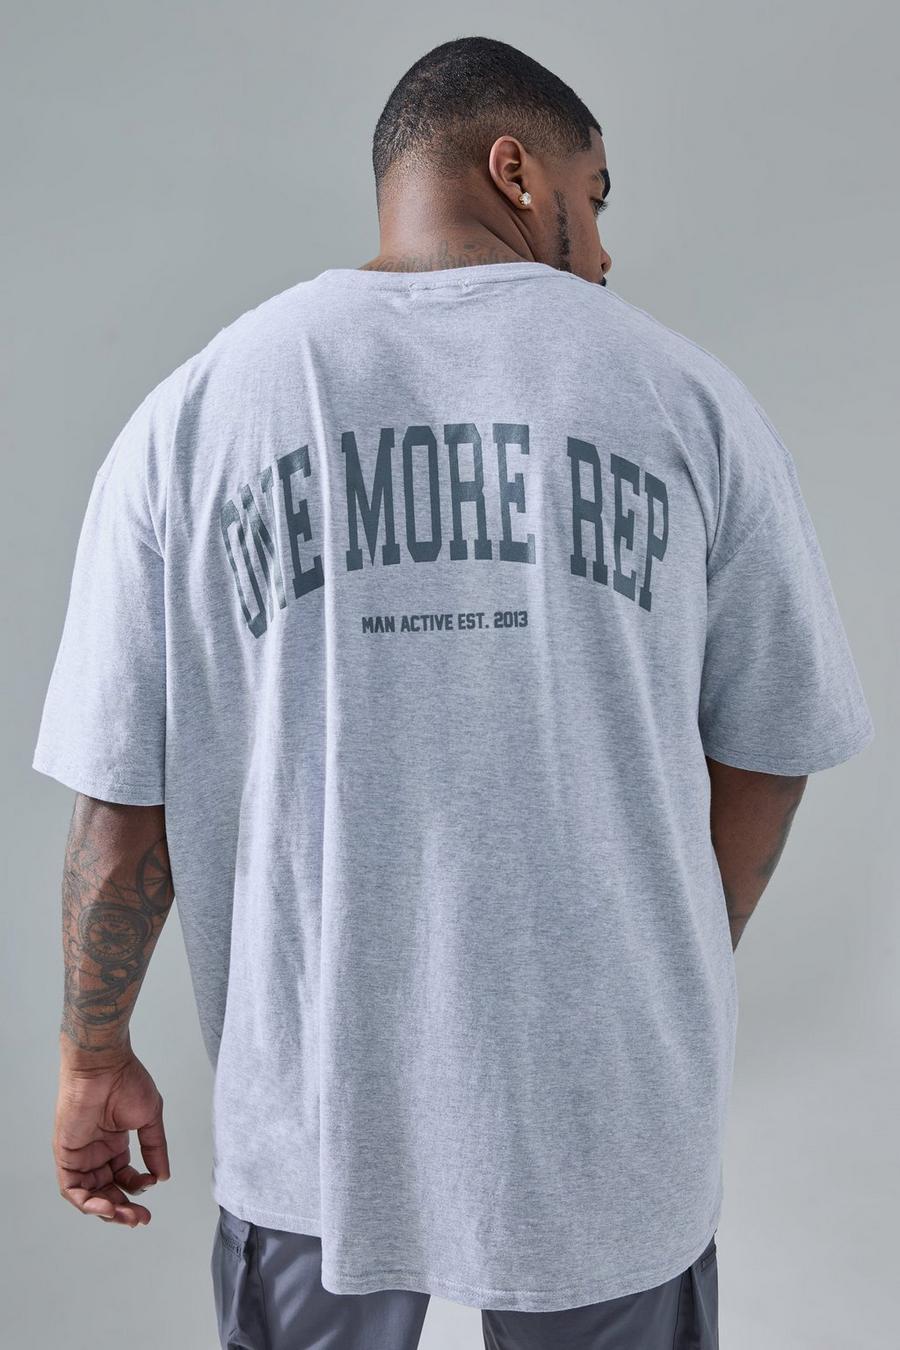 Plus Oversize Man Active T-Shirt mit One More Rep Print, Grey marl image number 1